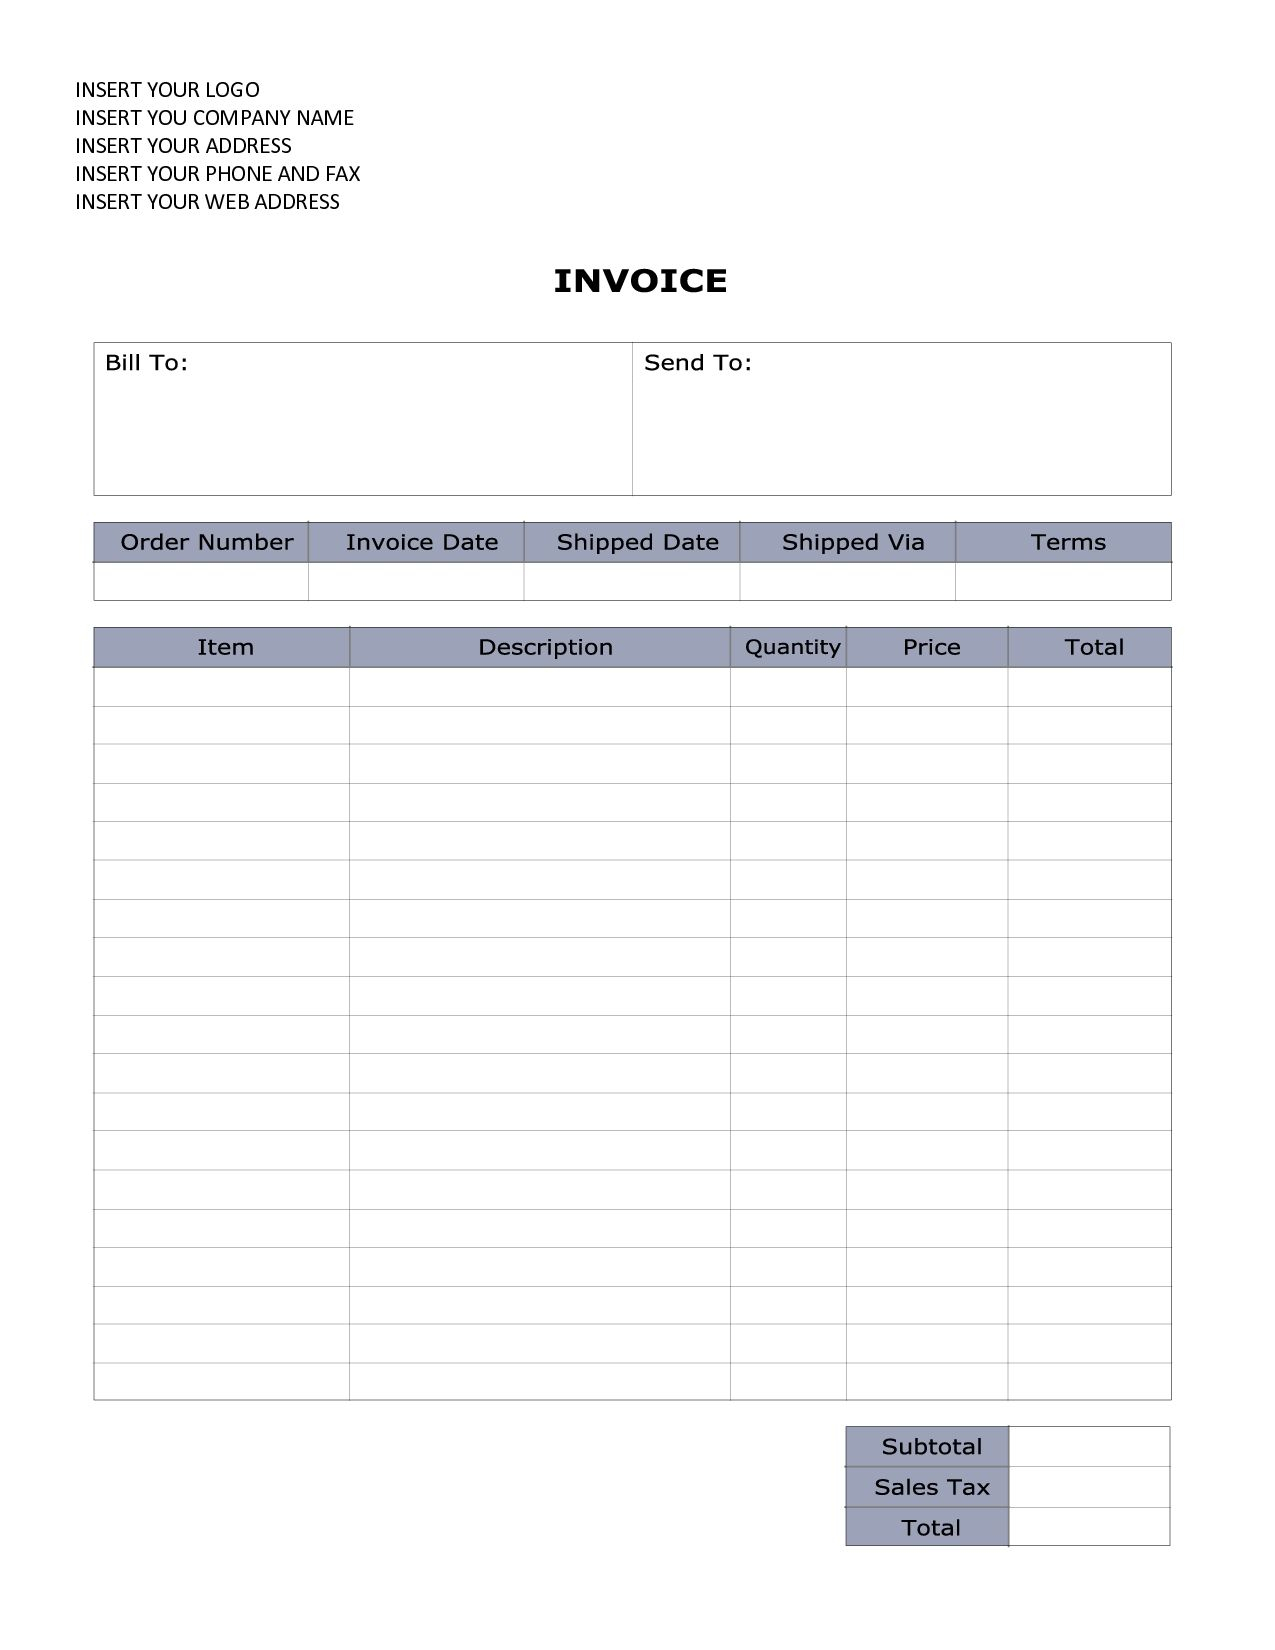 Word Document Invoice Template Sales Invoice Sample Word In Free Invoice Template Word Mac